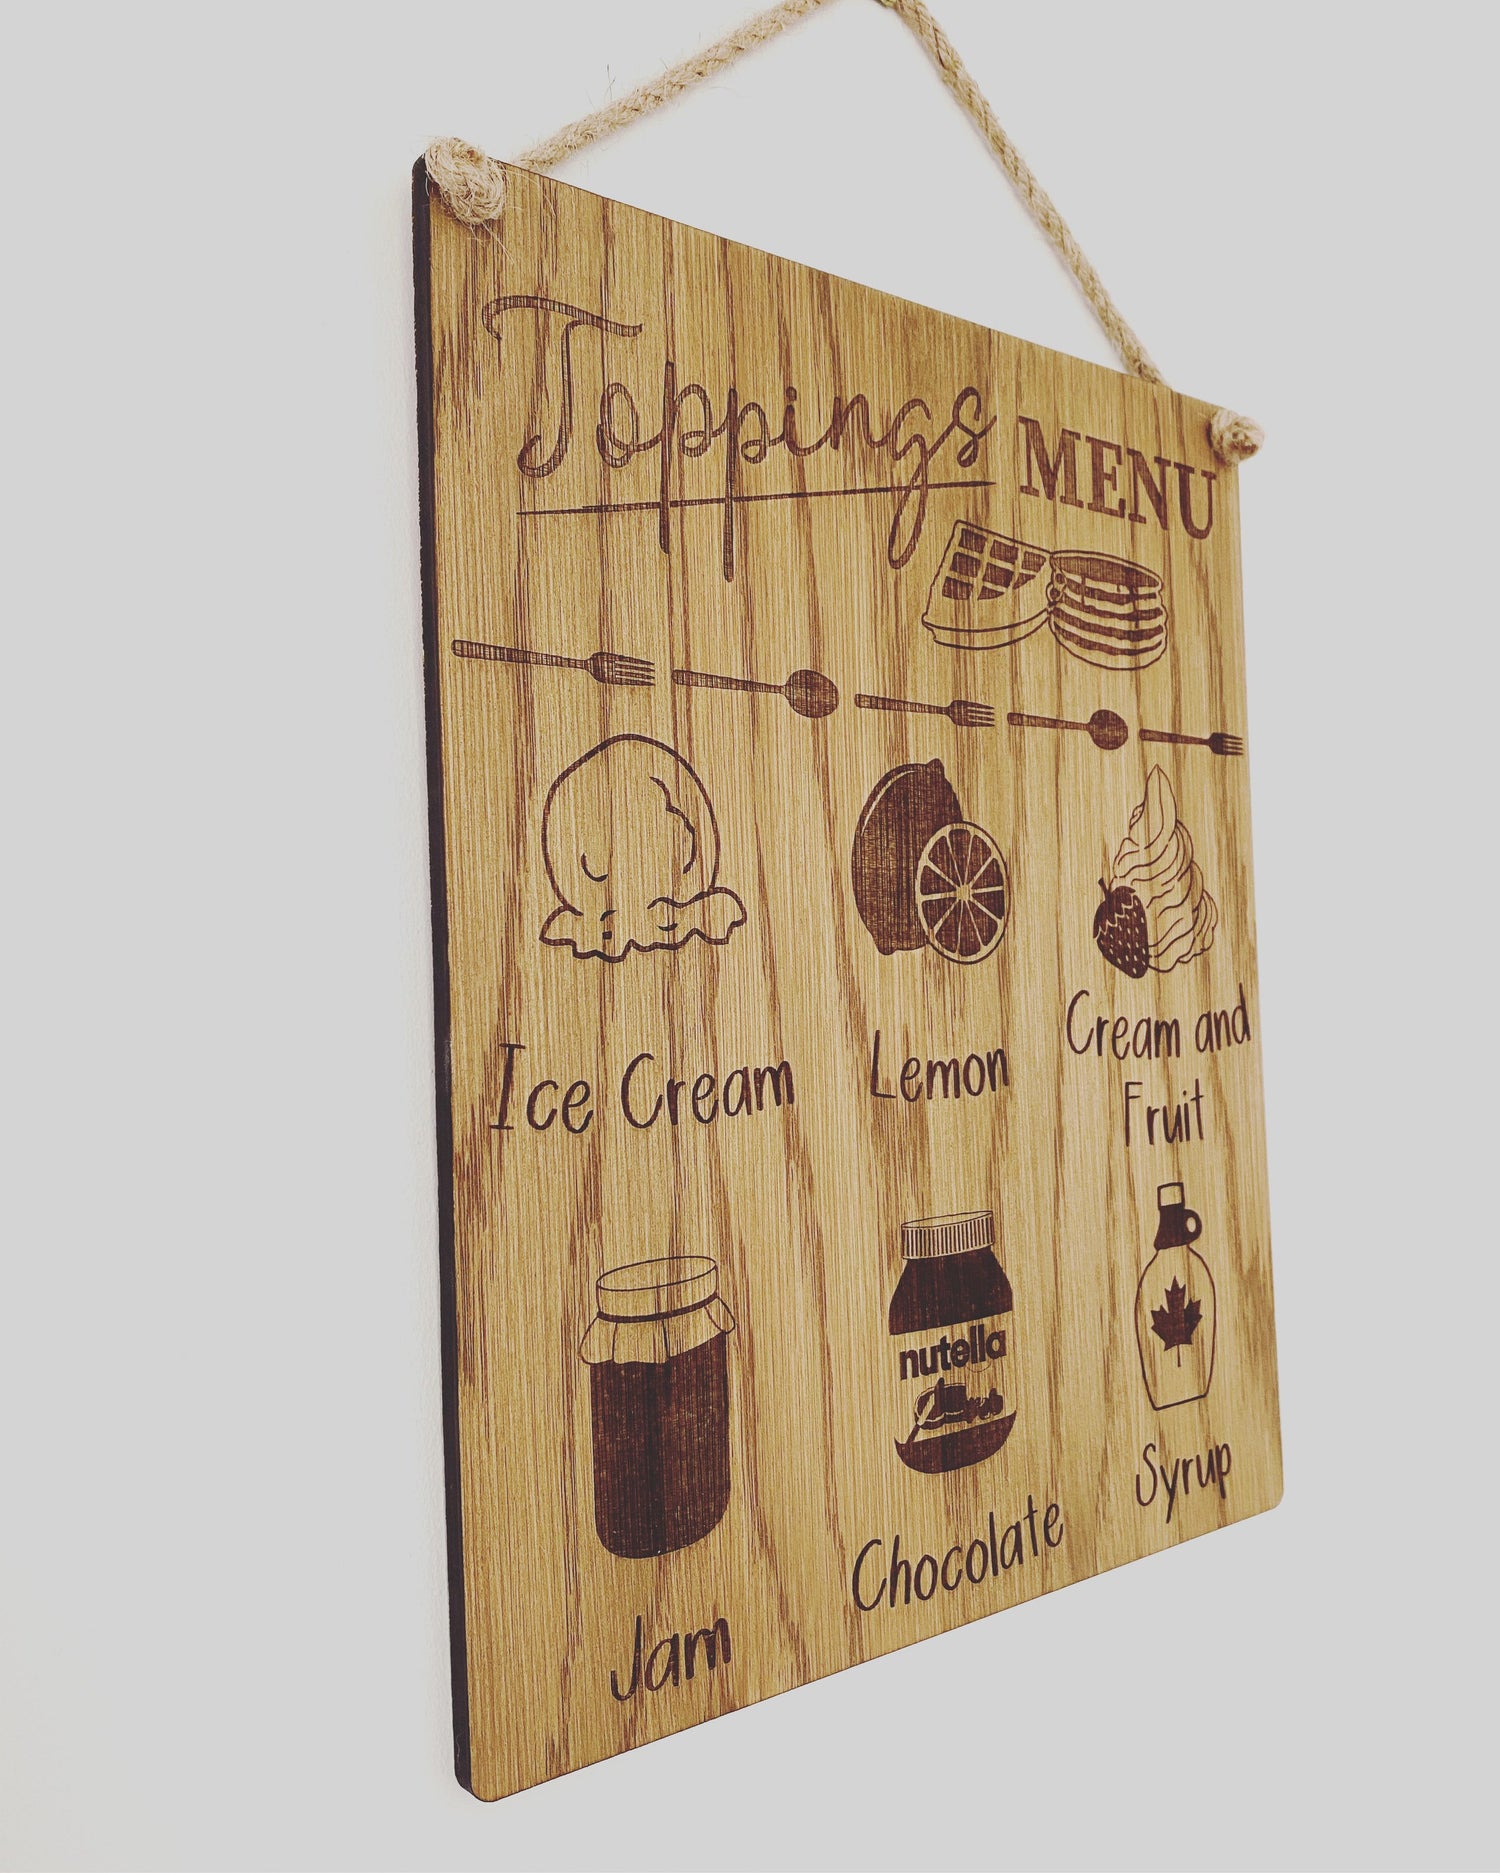 Toppings Menu | Pancake Toppings | Waffle Toppings | Ice Cream Toppings | Kitchen Wall Decor | New Home Gift | Shop Menu |Nutella Lover Gift